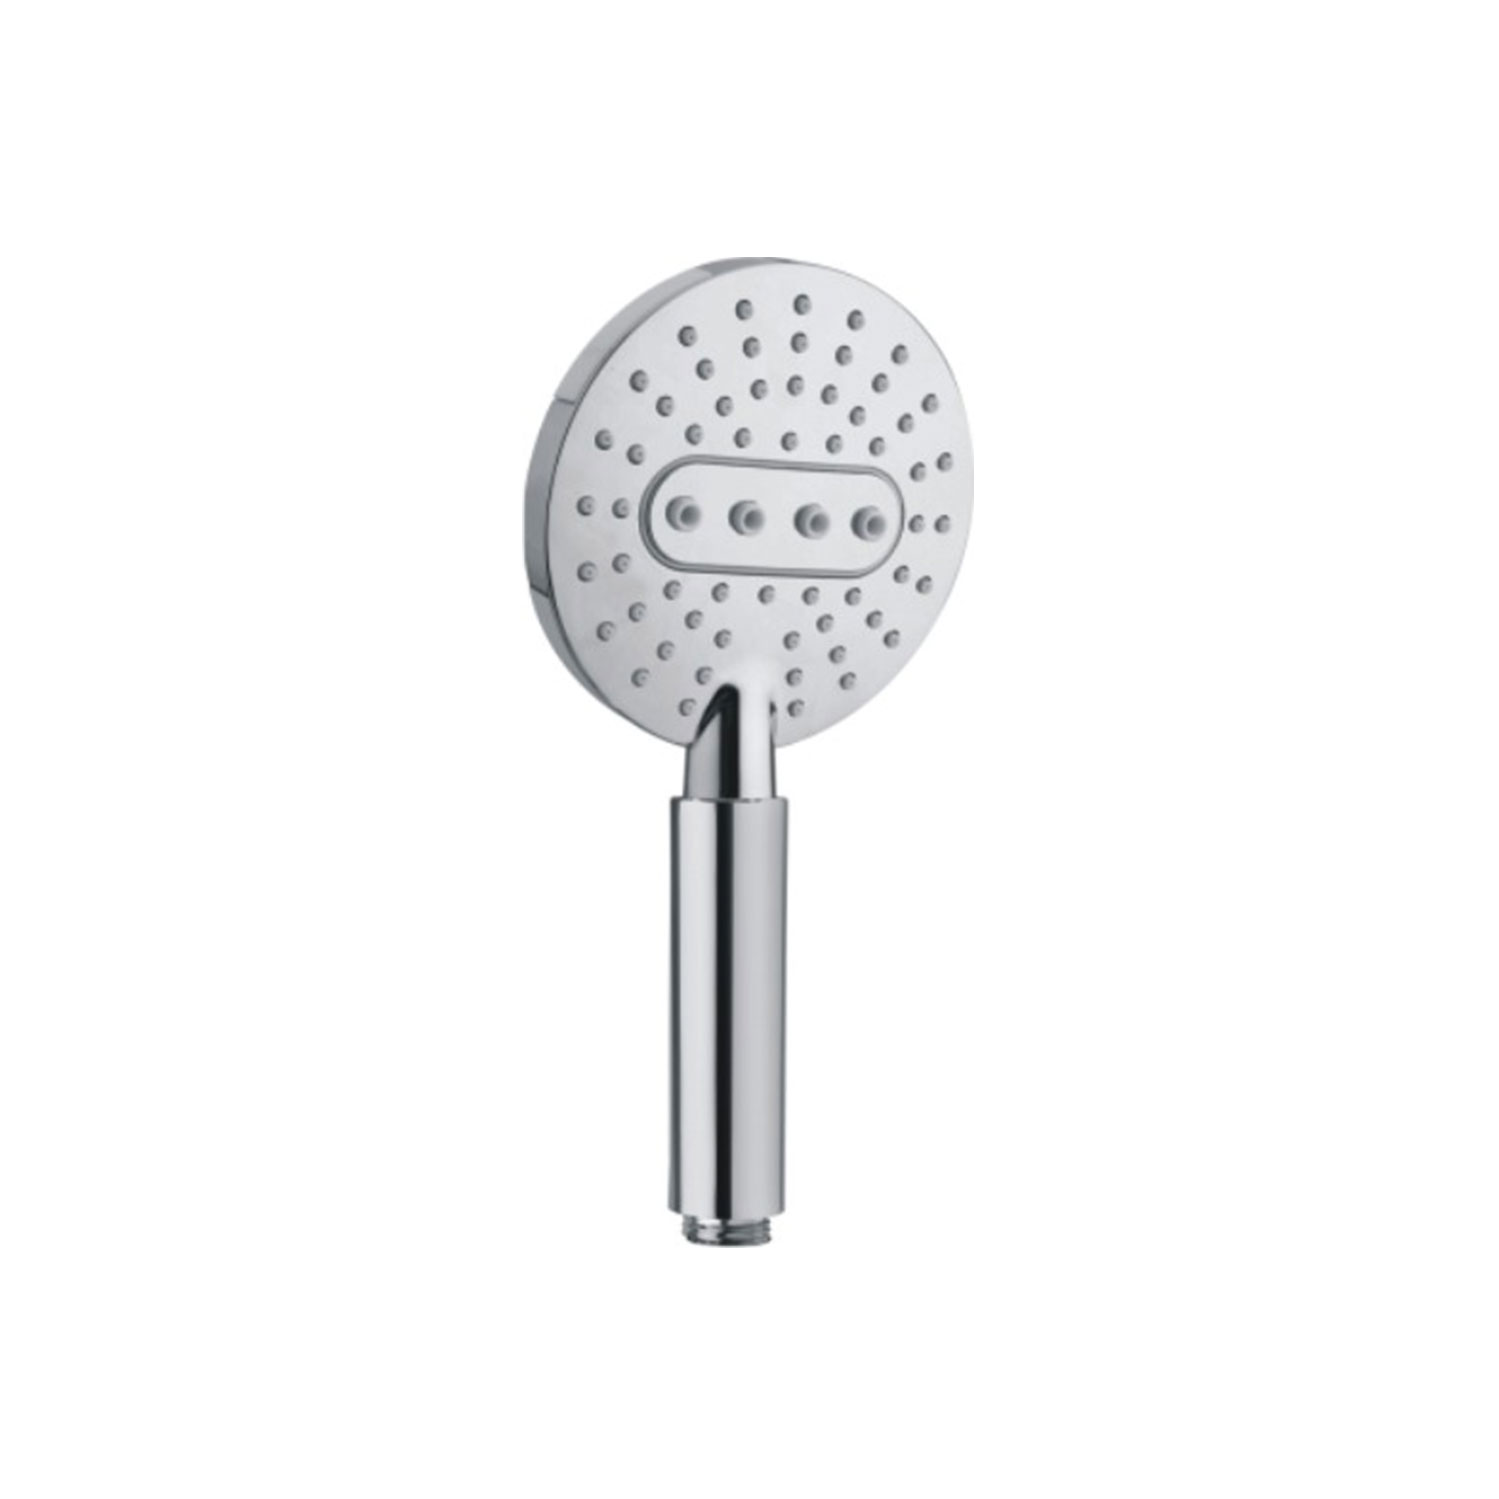 Fonde Multi Jet Hand Shower Set with 1.5 mtr SS 304 Tube